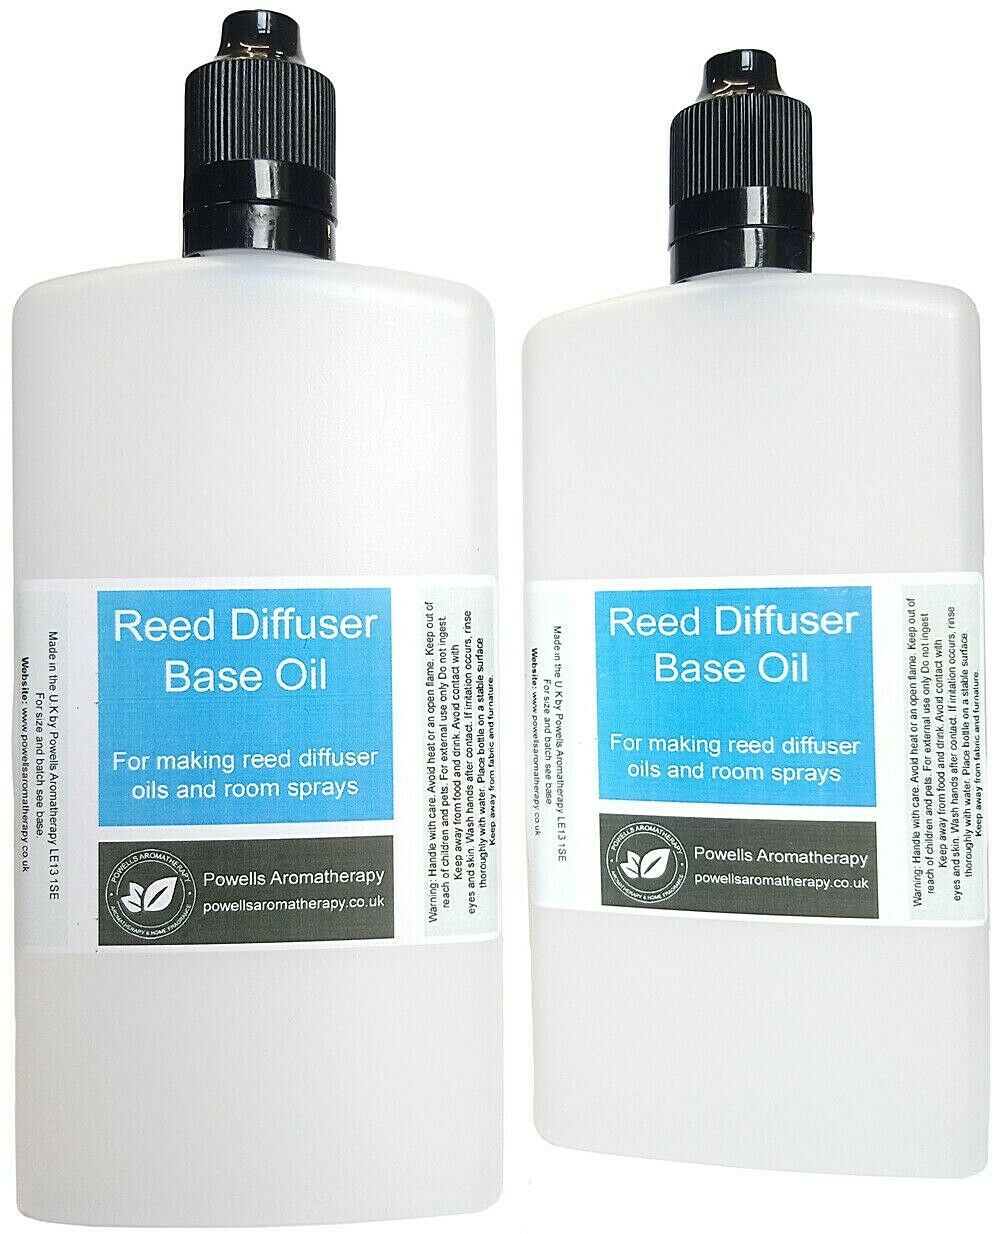 240ml - Reed Diffuser Base Oil - Reed Diffuser Carrier Oils